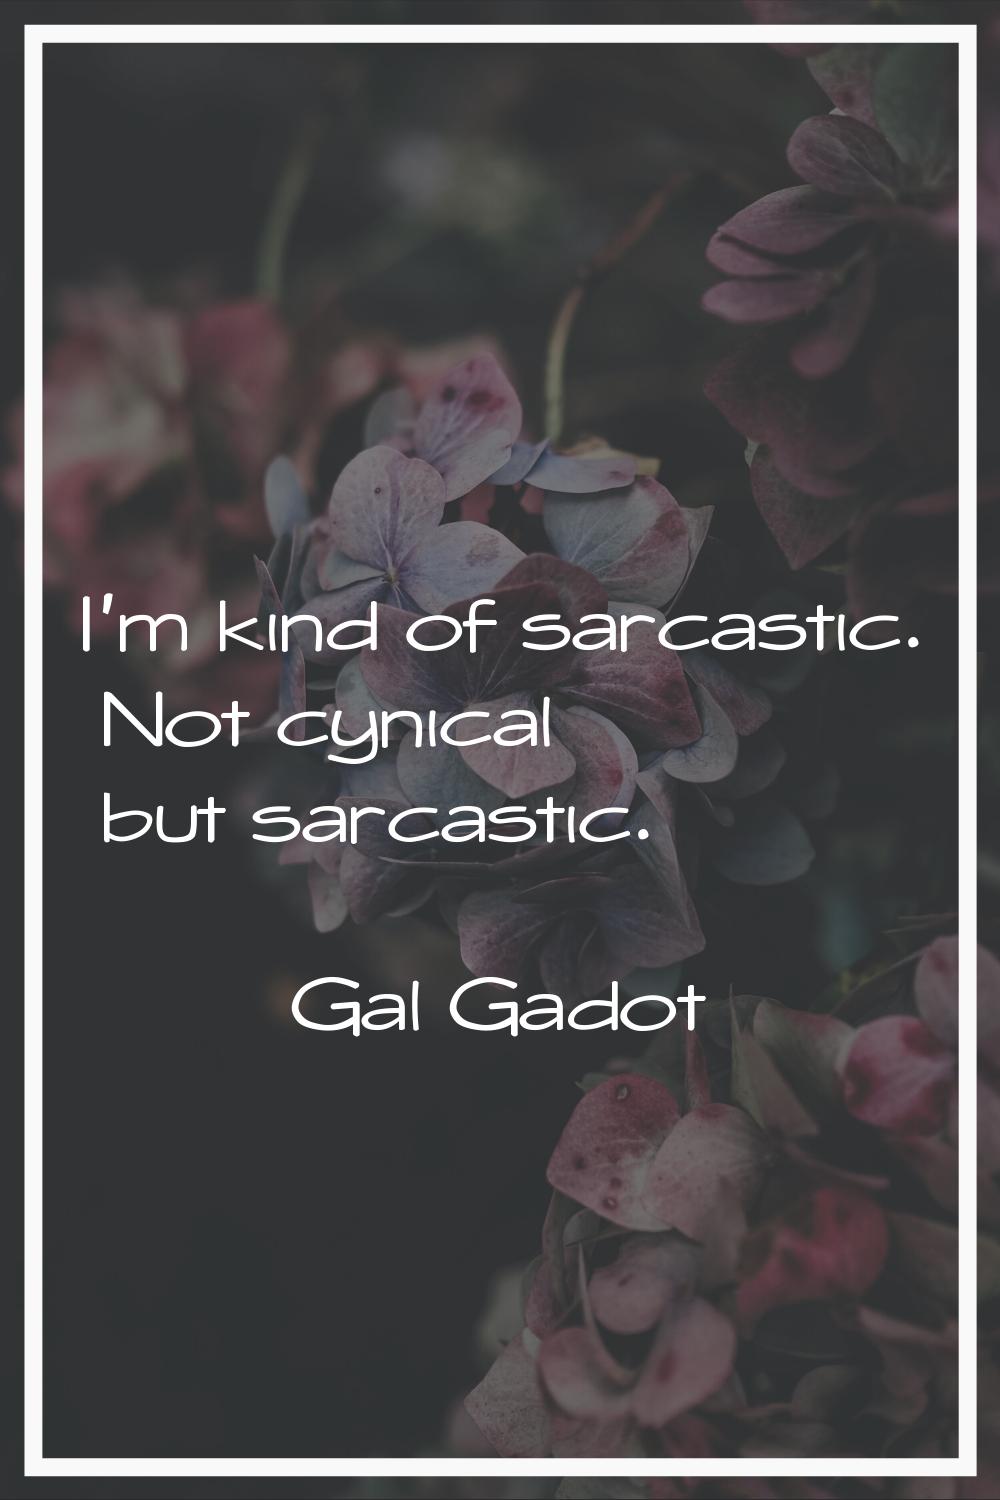 I'm kind of sarcastic. Not cynical but sarcastic.